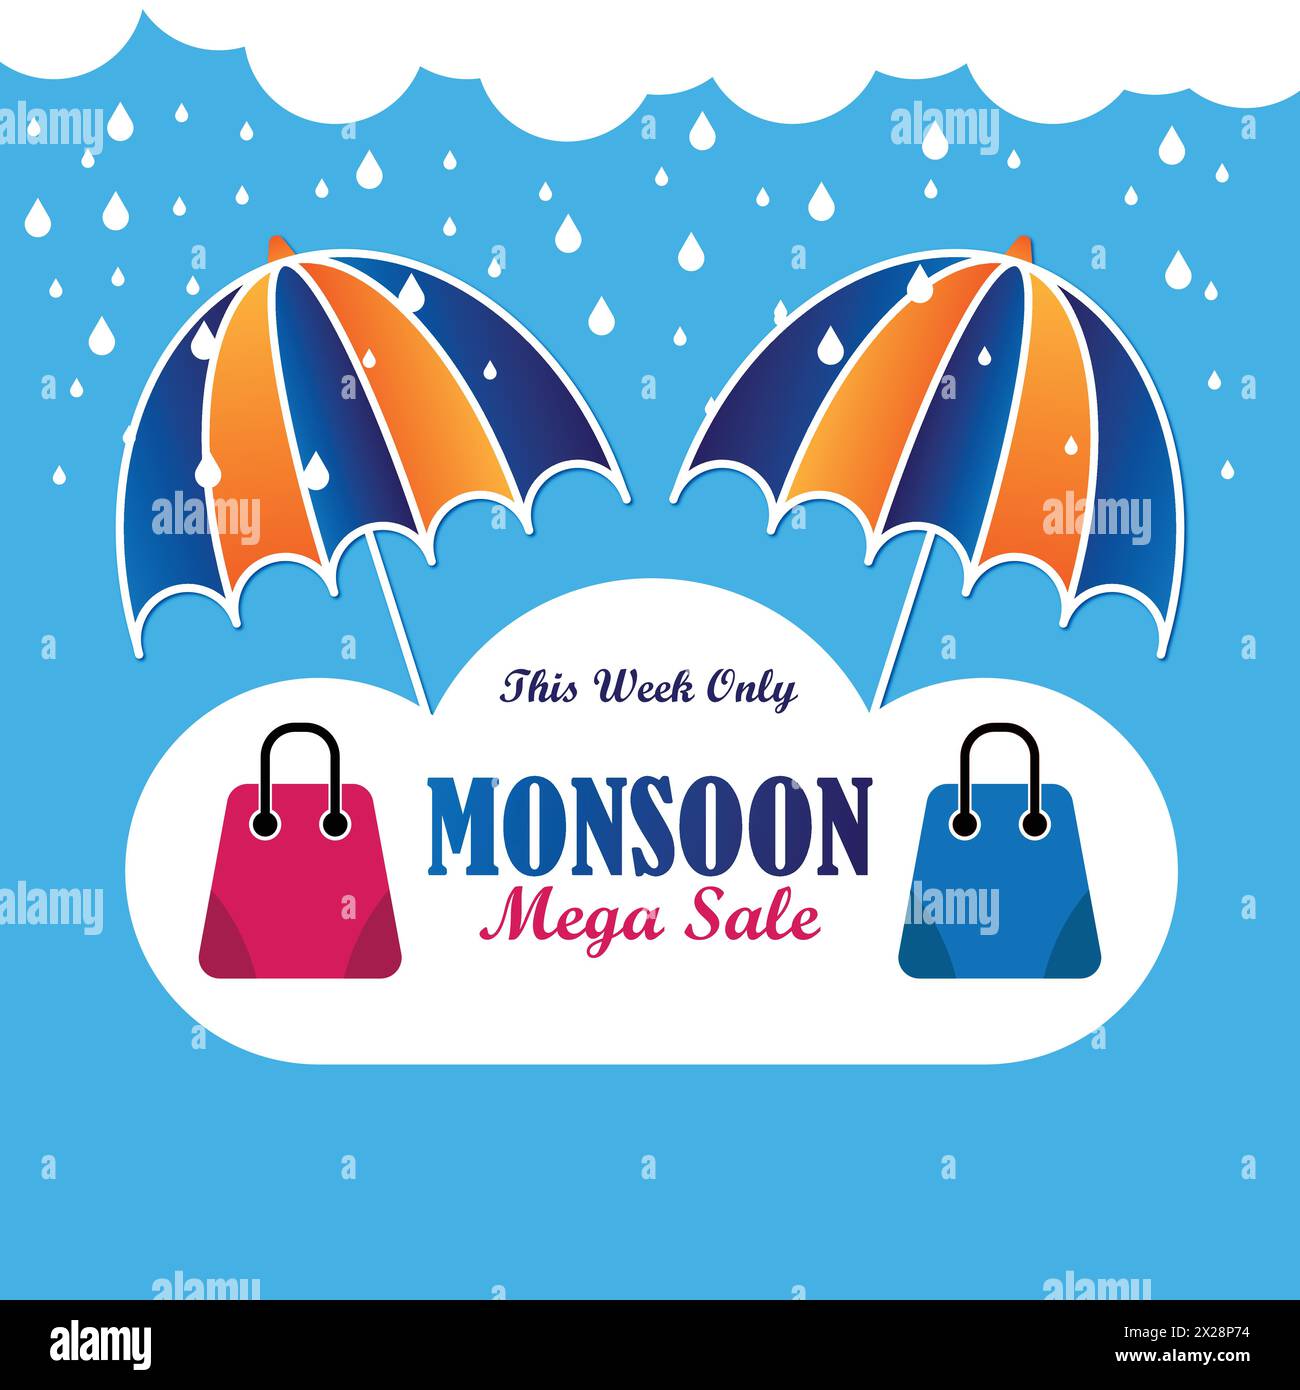 monsoon mega sale banner with rain background and umbrella and shopping bags. Vector illustration. Stock Vector